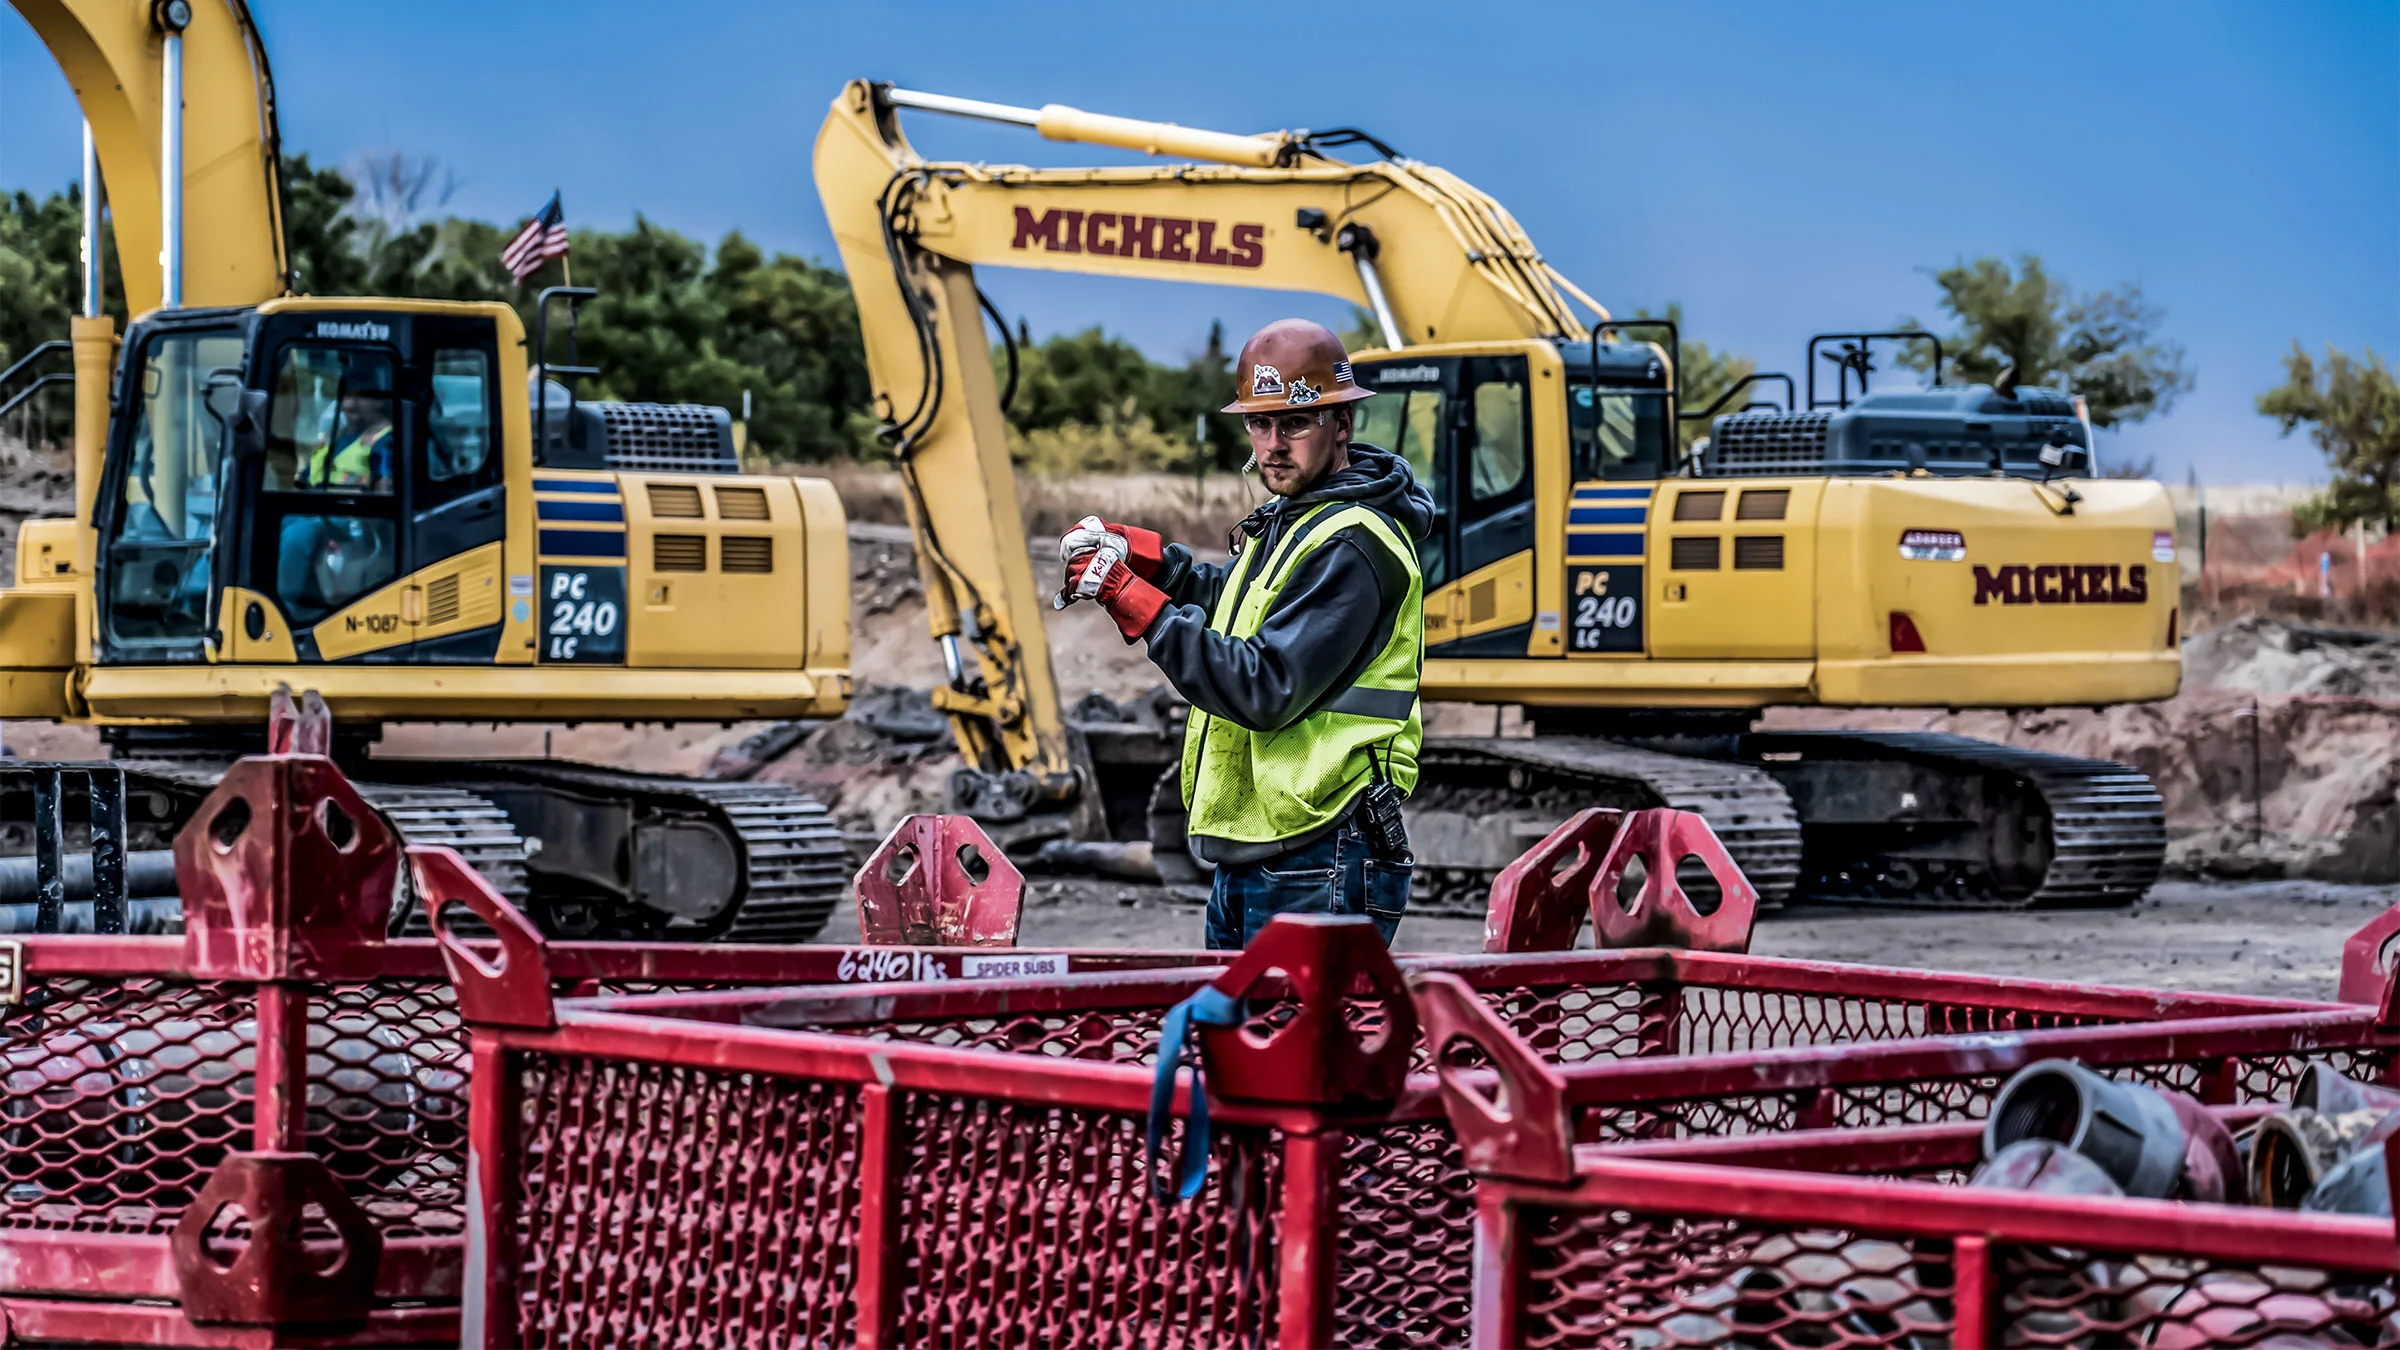 A field worker uses hand signals to guide an operator on safe placement of a load